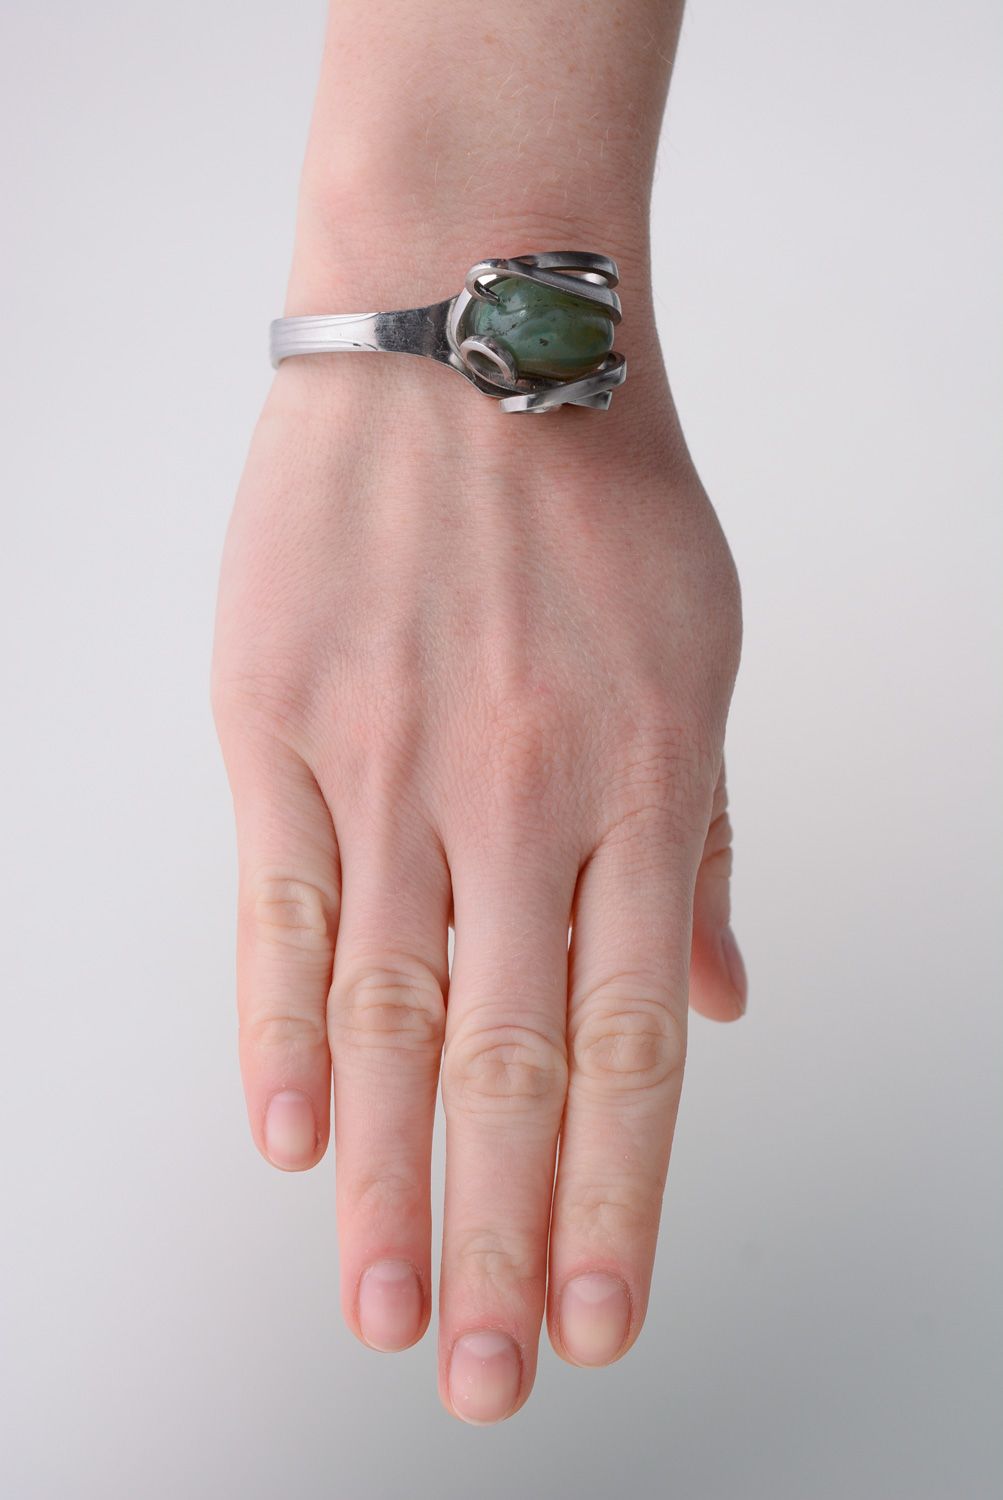 Homemade metal fork bracelet with green stone photo 3